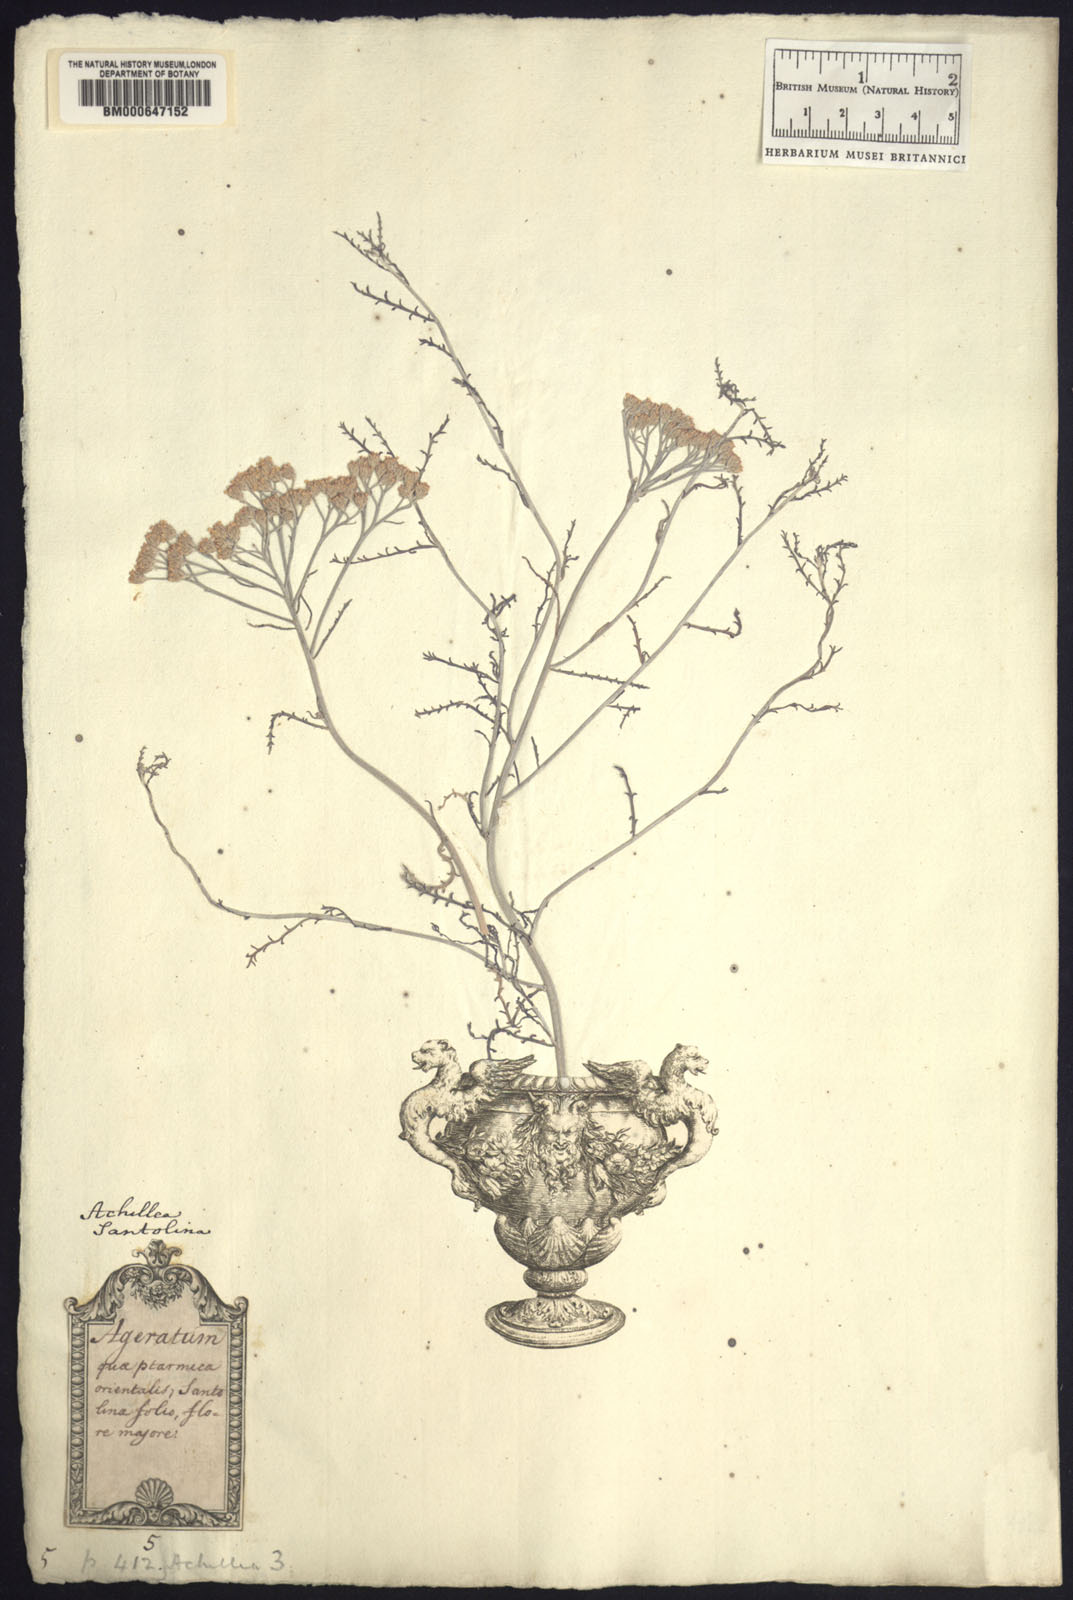 https://www.nhm.ac.uk//resources/research-curation/projects/clifford-herbarium/lgimages/BM000647152.JPG